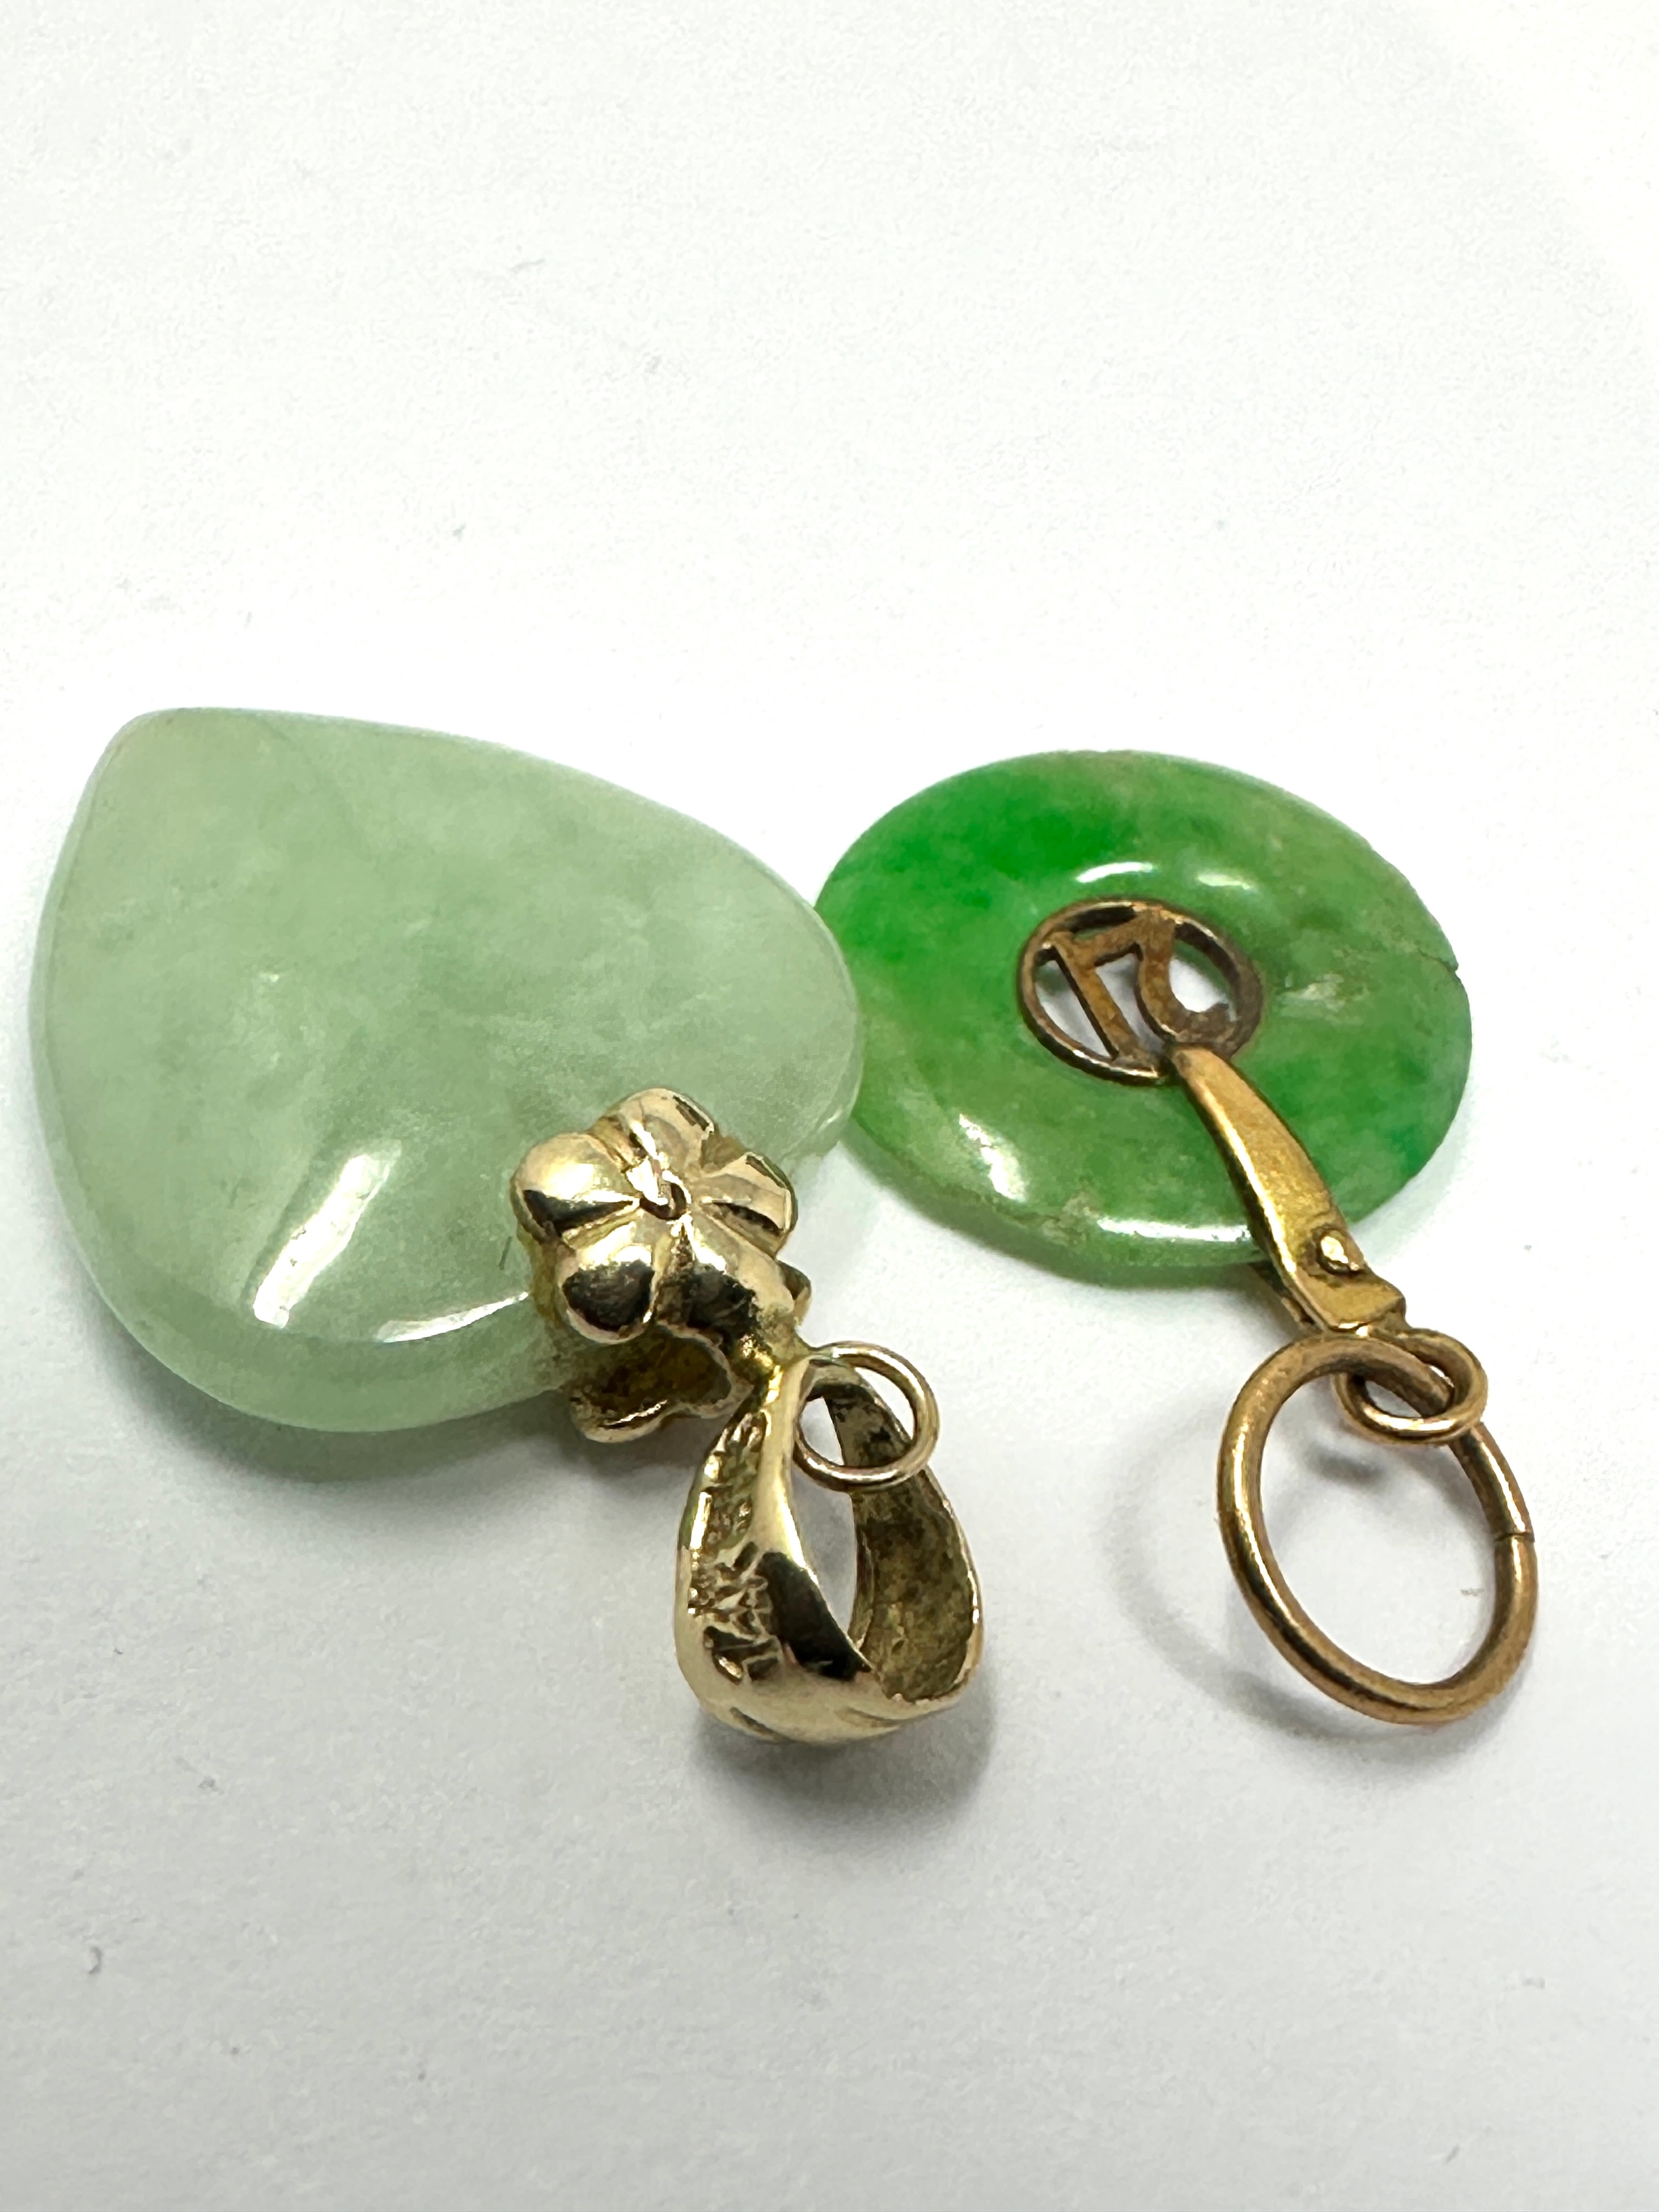 2 small 14ct gold jade pendants weight 2.5g - Image 2 of 2